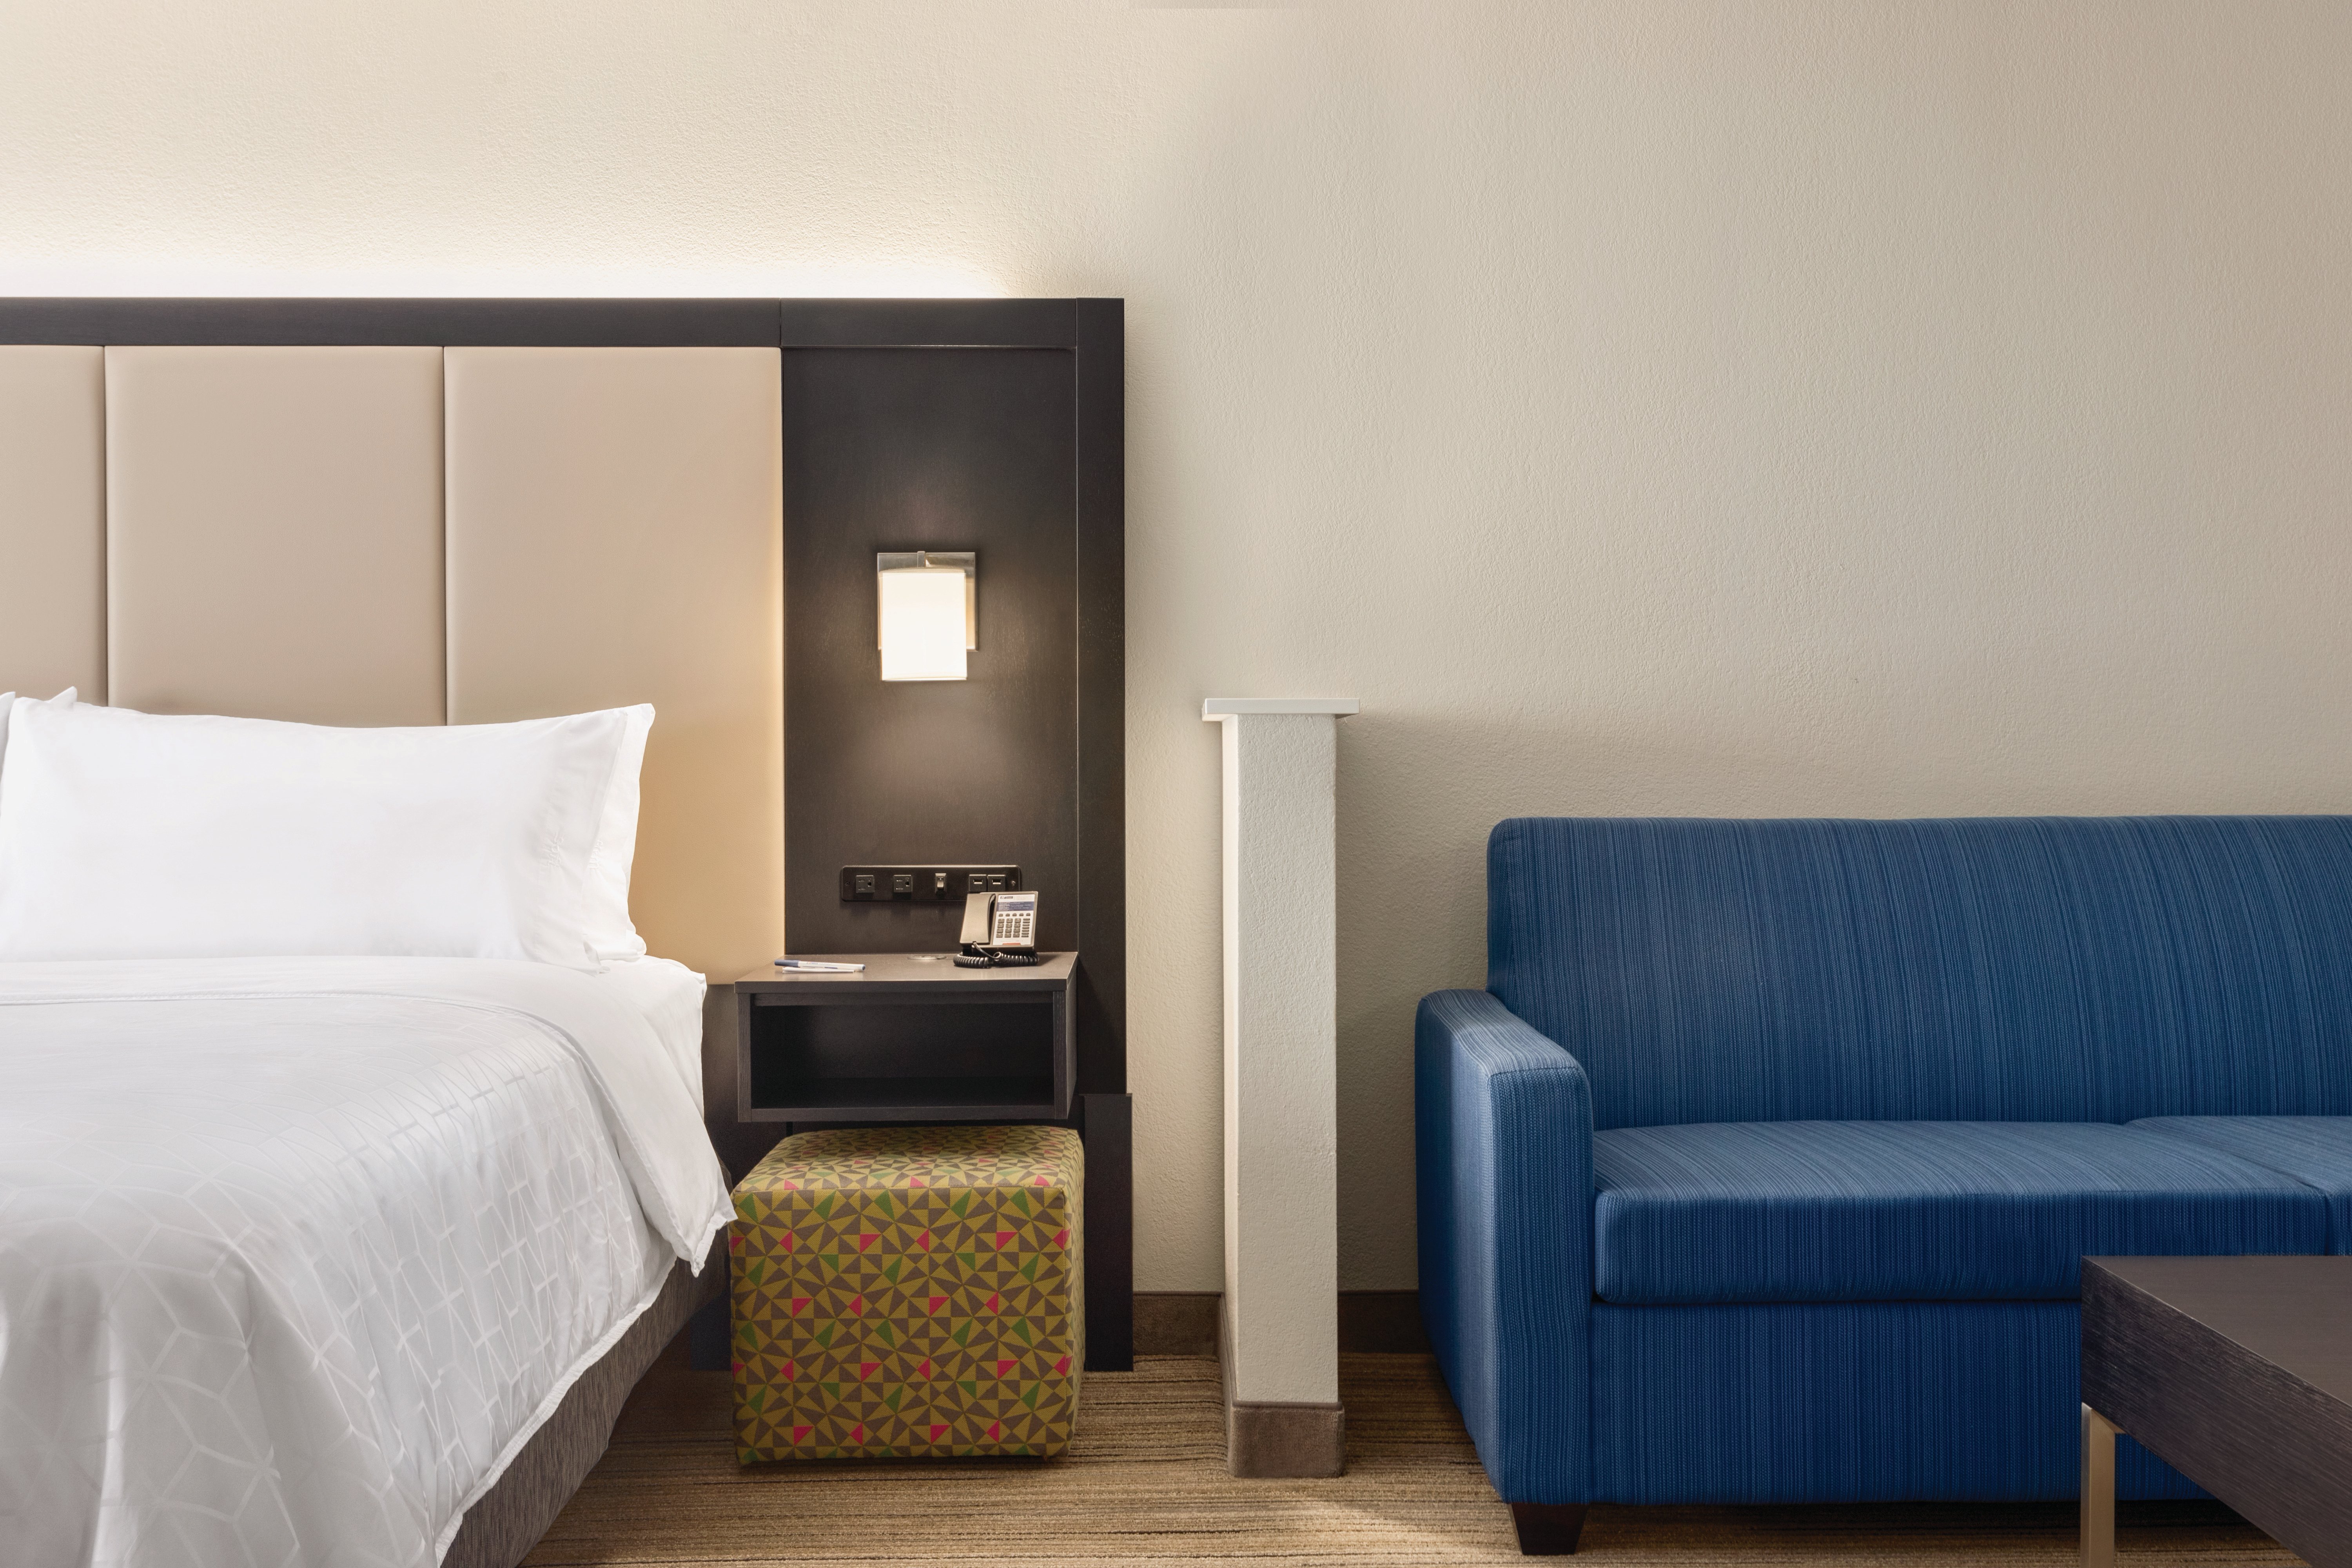 Make yourself at home in our guest rooms